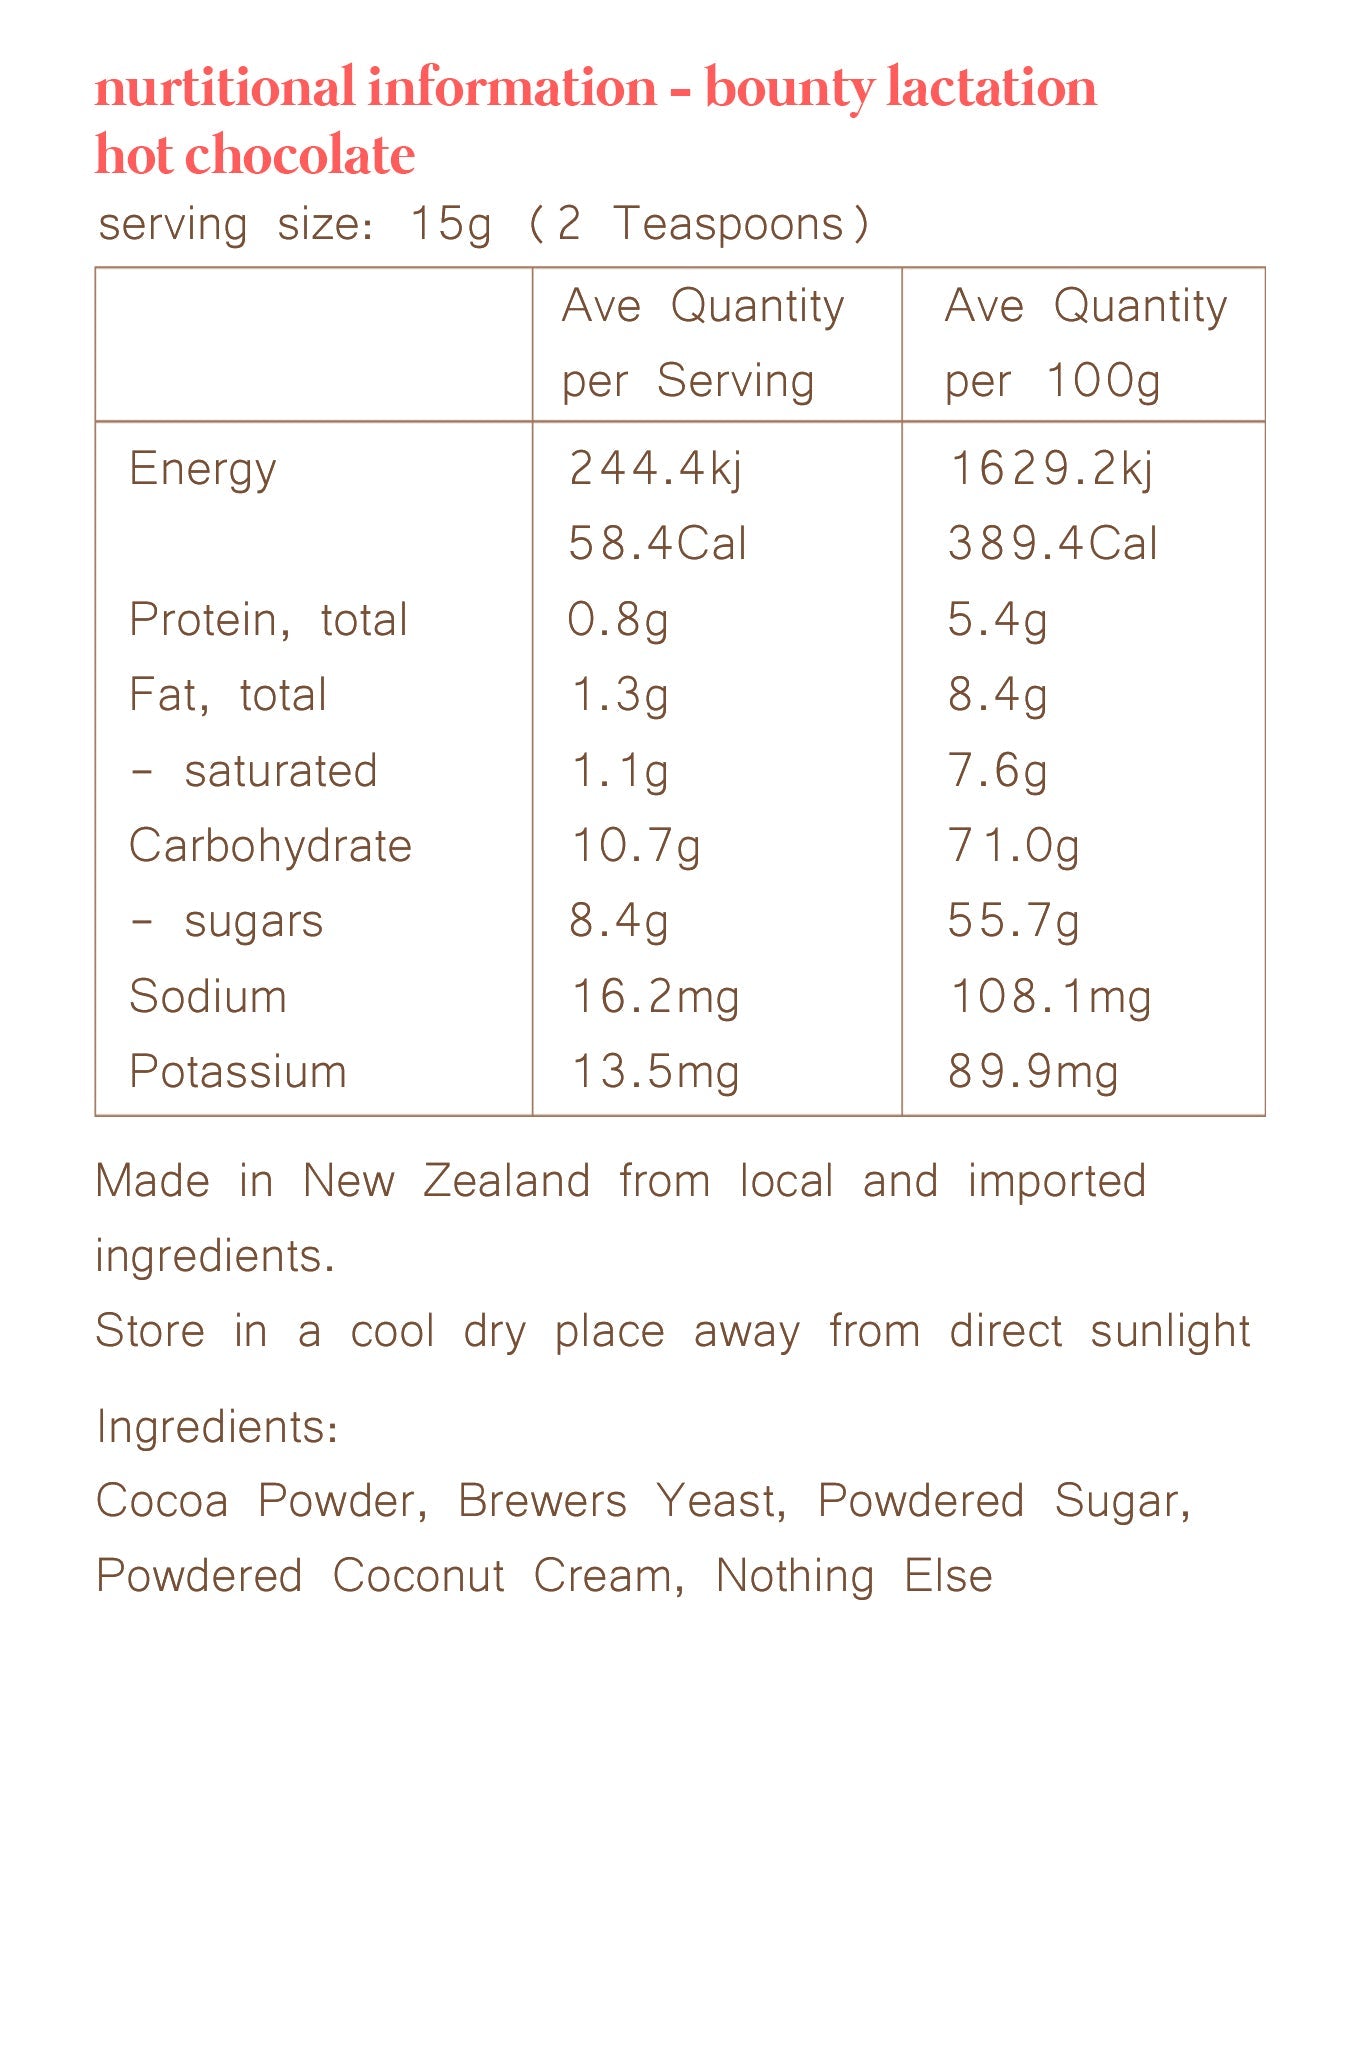 Hot chocolate lactation powder. Lactation Blend NZ. How to boost your milk supply